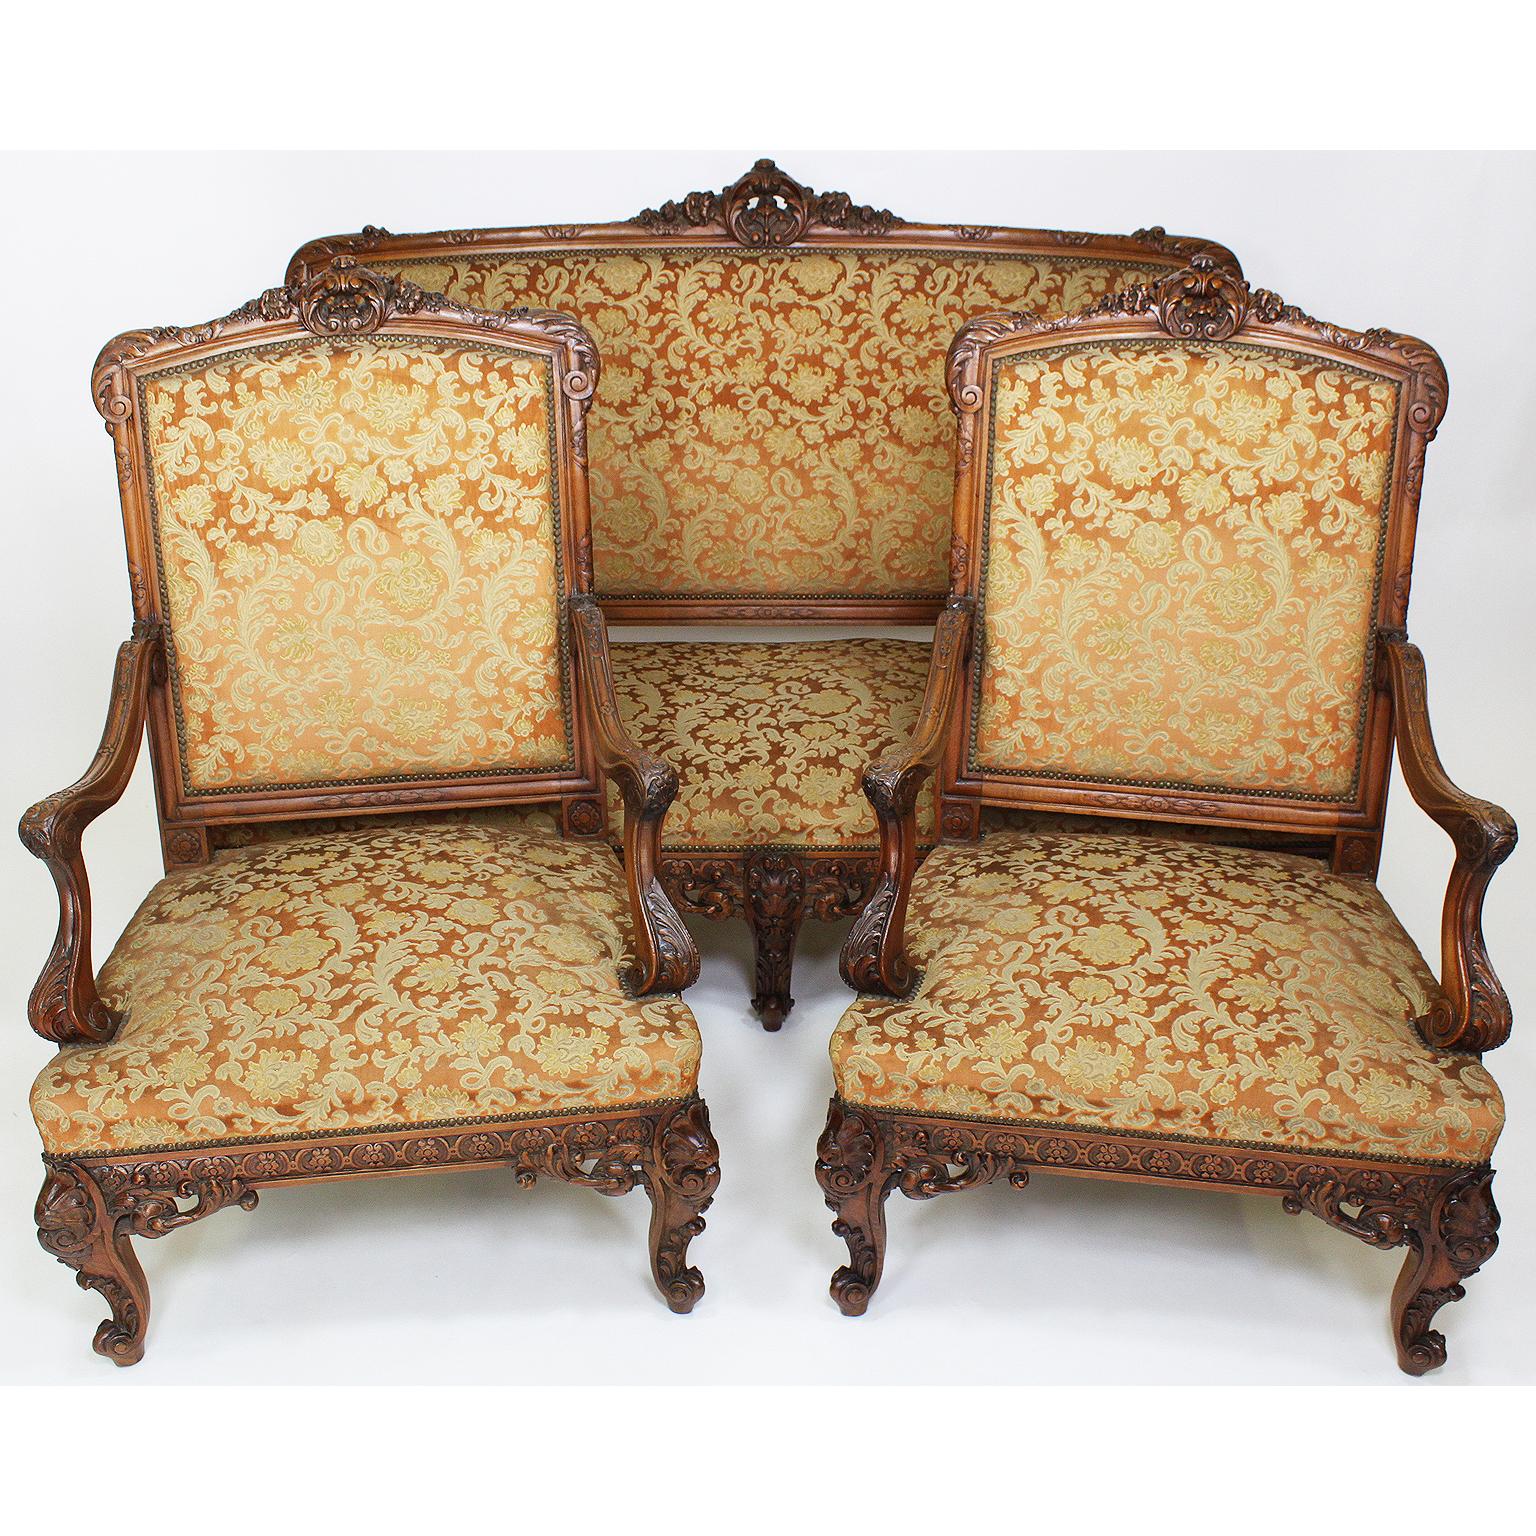 A fine and large French 19th century Louis XV style carved walnut three-piece salon suite. The high back intricately carved frames with floral and wreath design, comprising of a three-corps settee and two armchairs, all with open and padded armrests